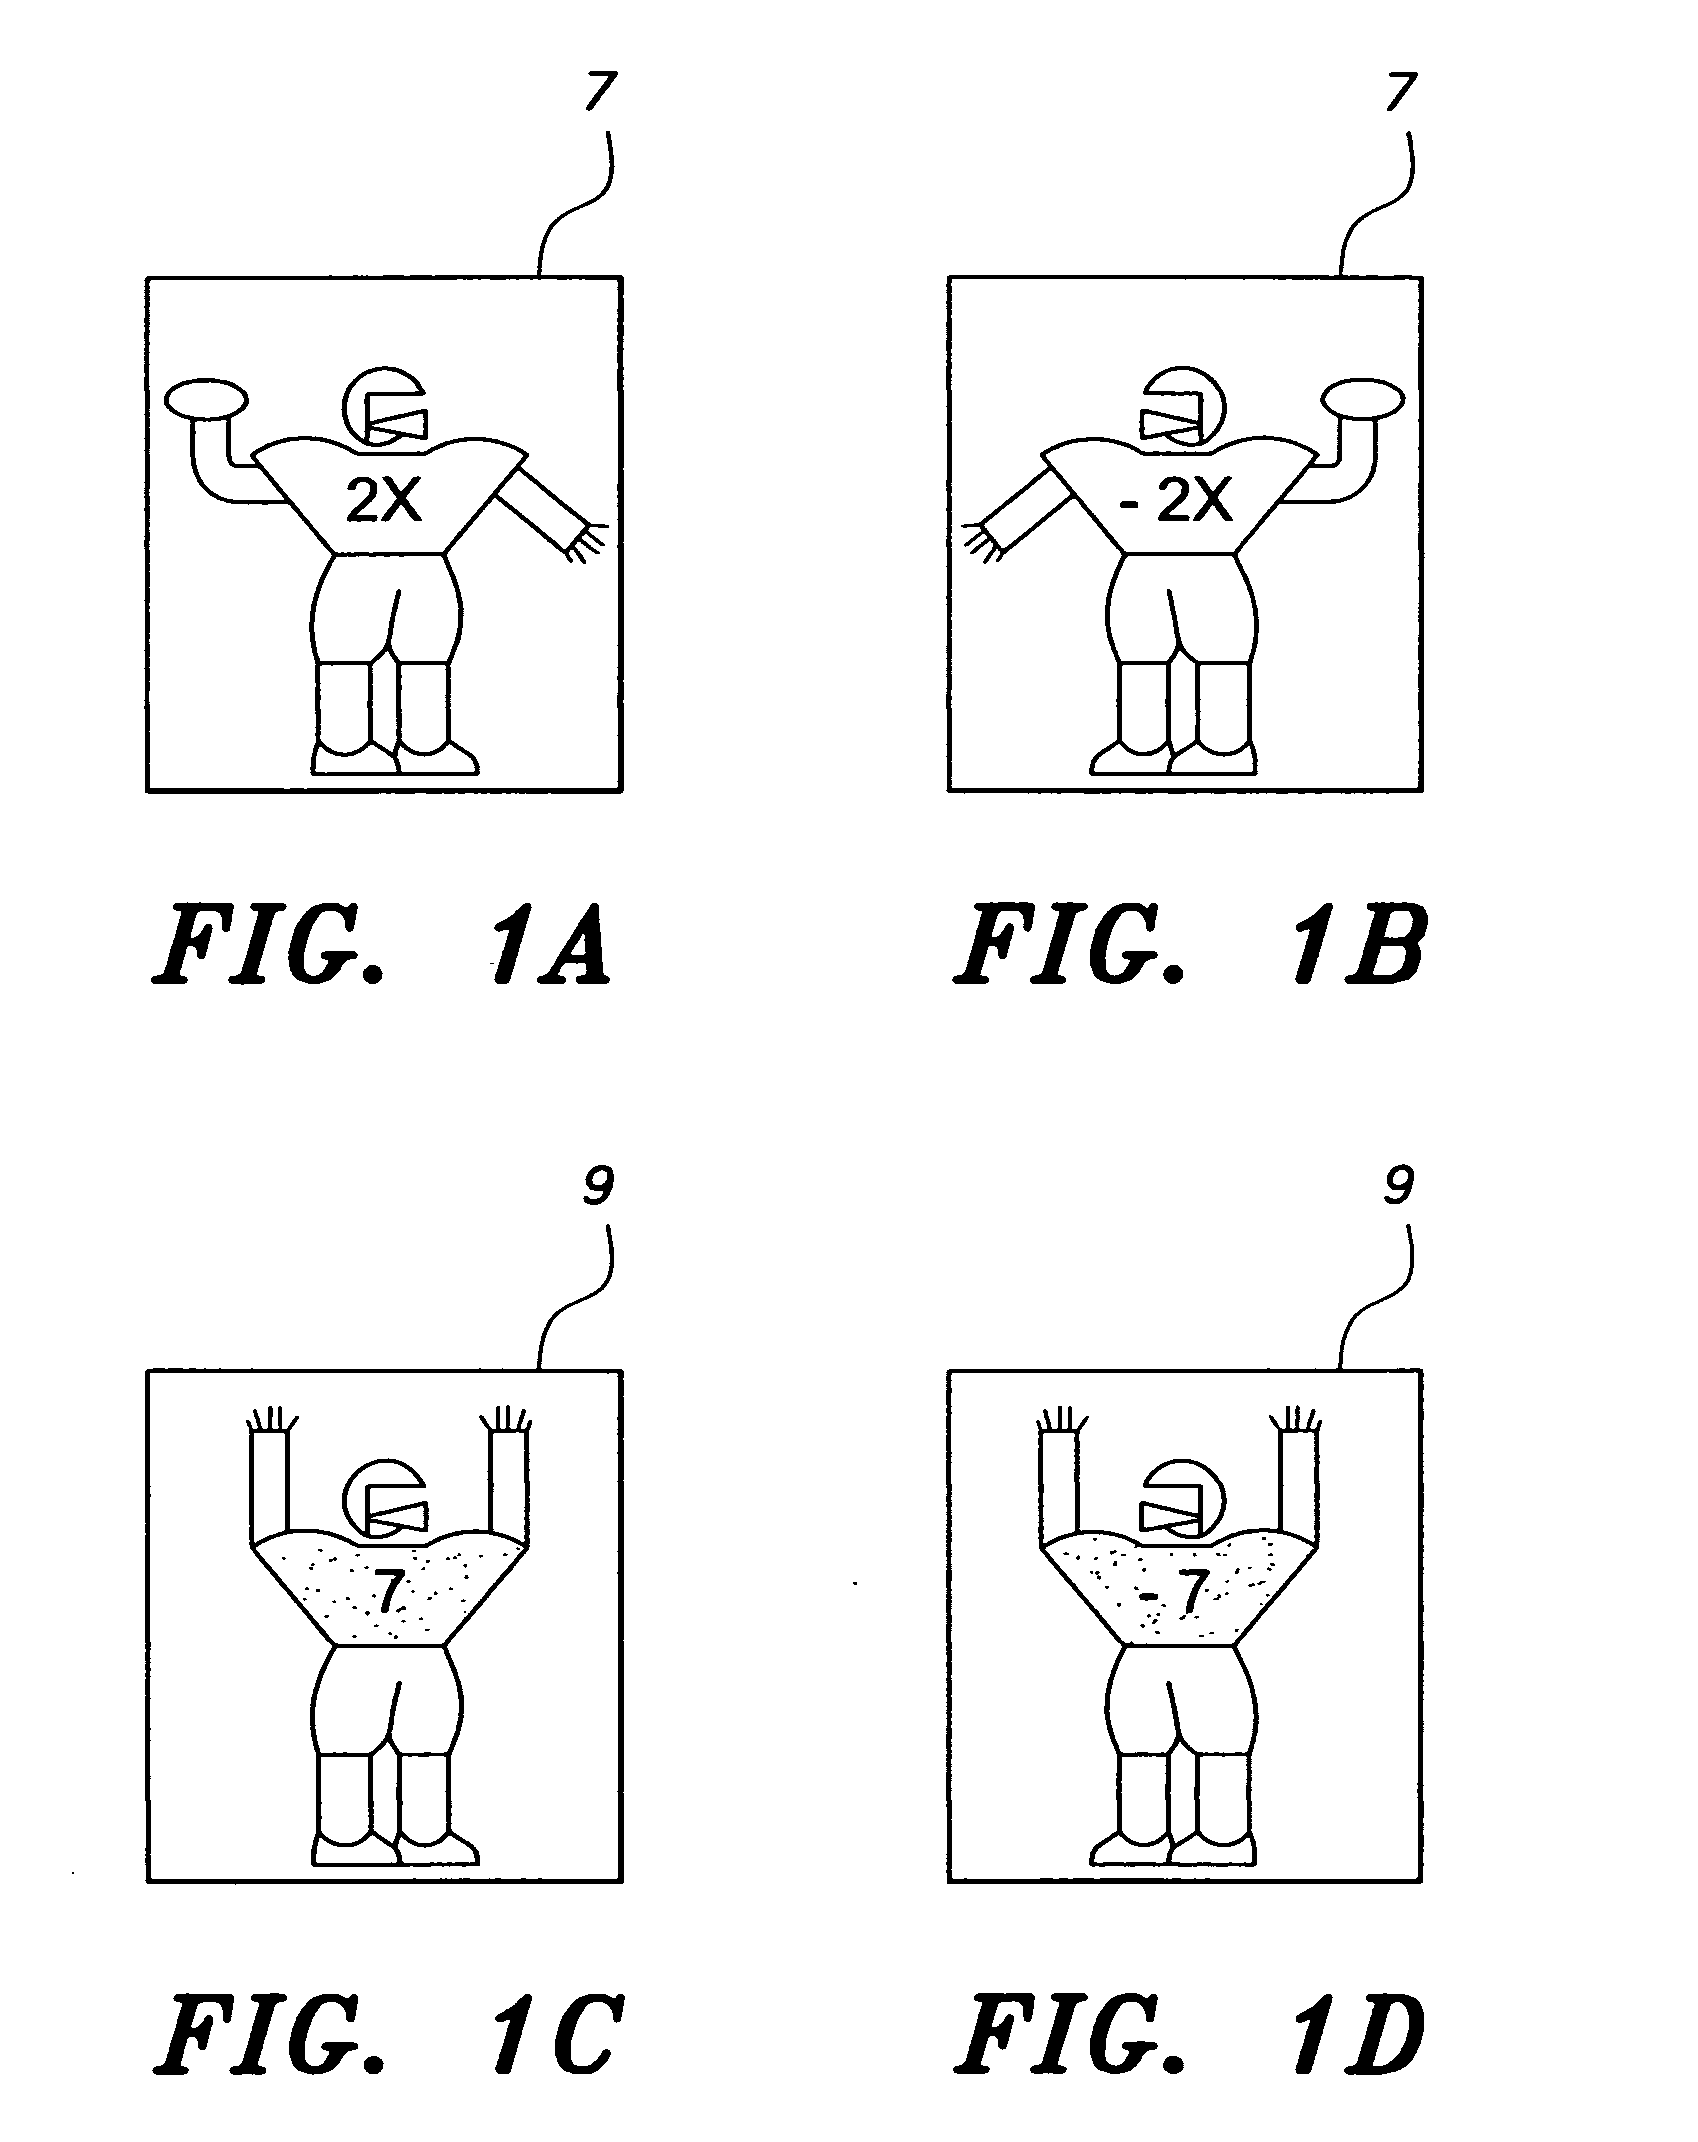 Visual and kinesthetic method and educational kit for solving algebraic linear equations involving an unknown variable